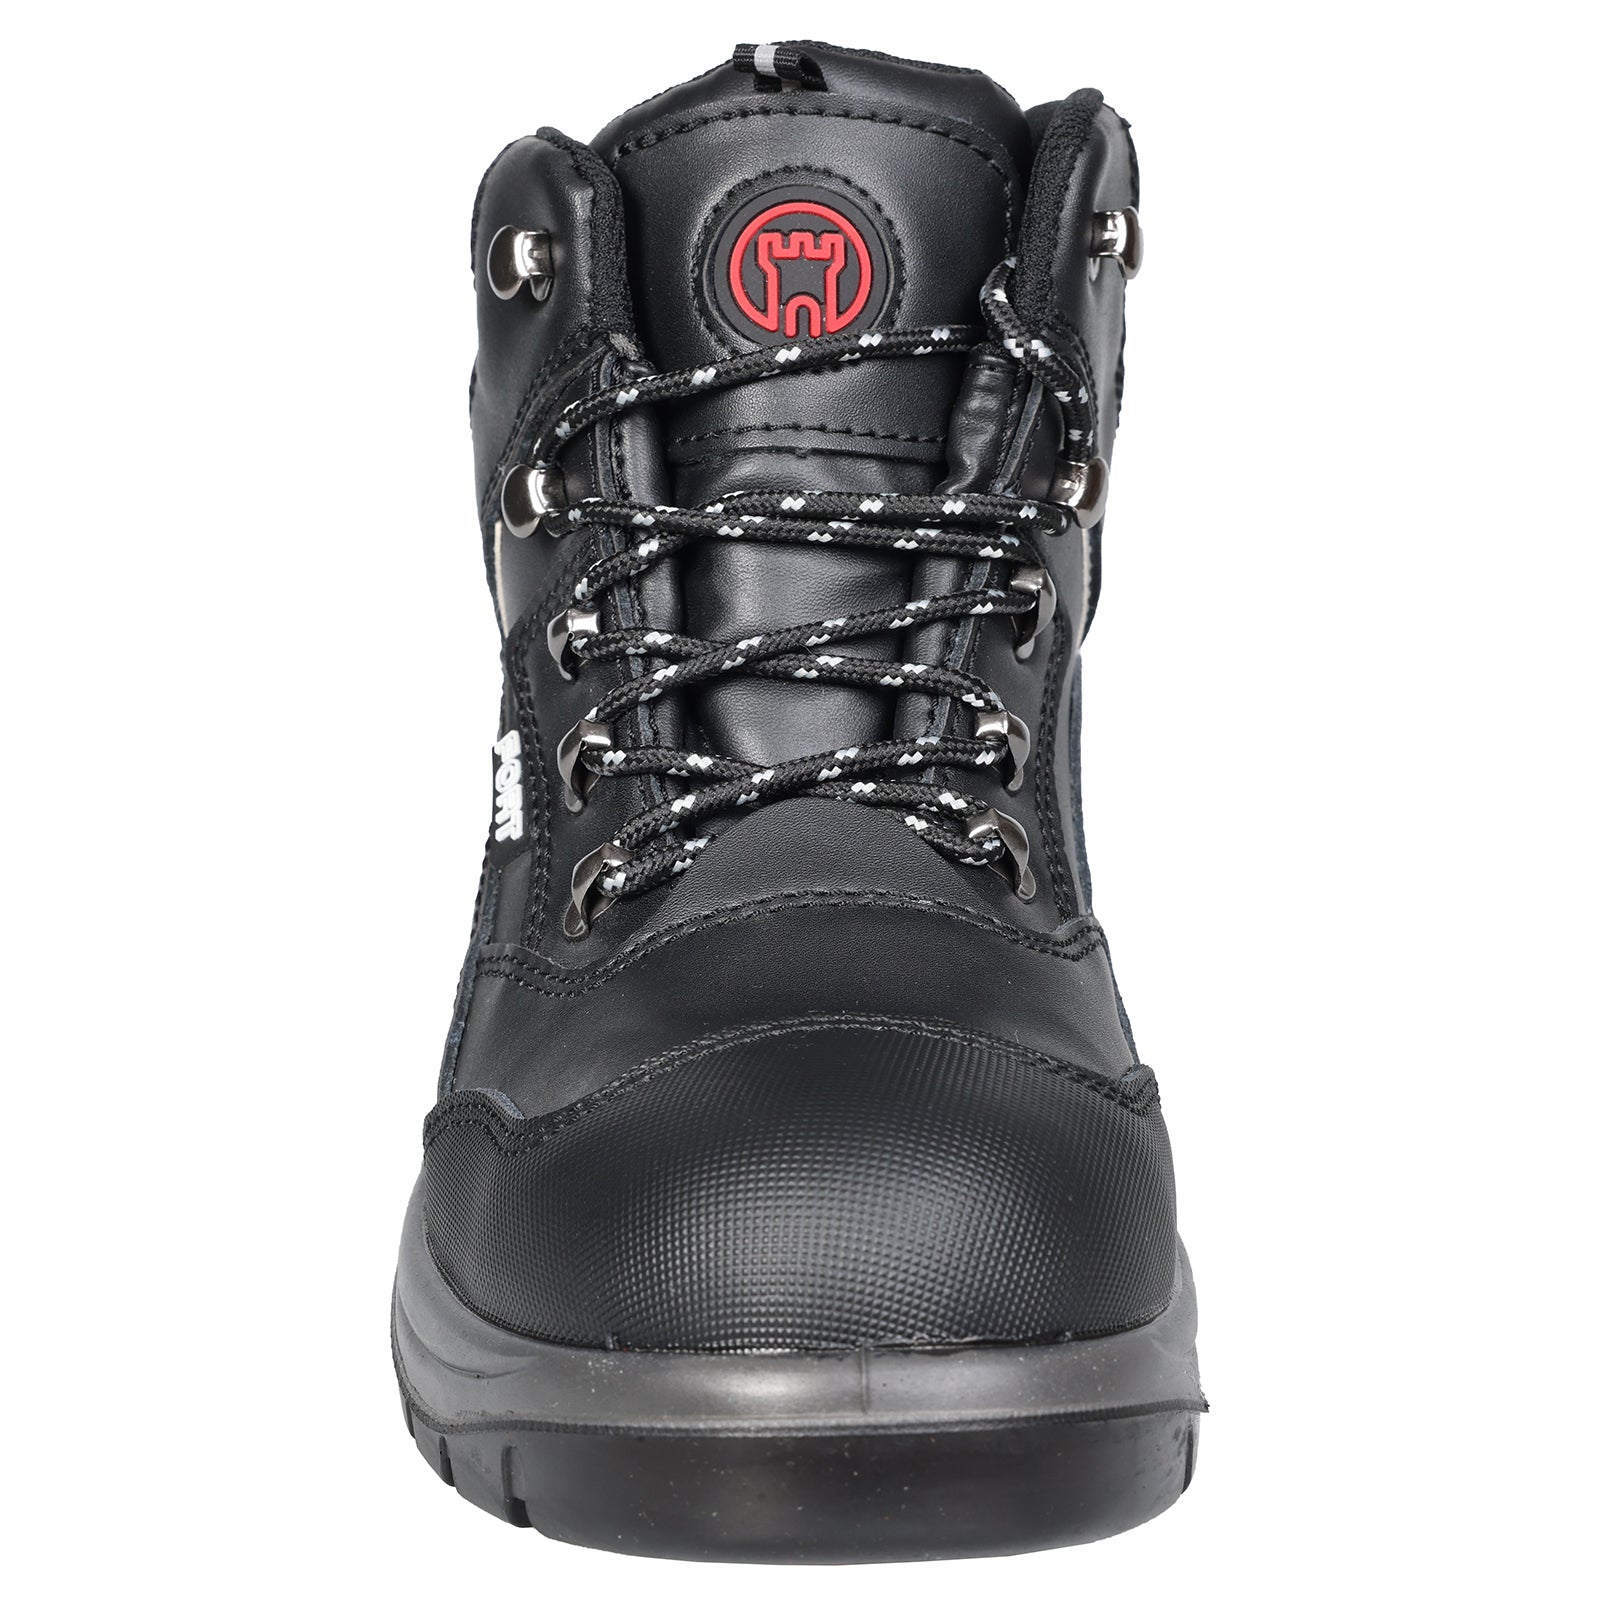 FORT KNOX SAFETY BOOT